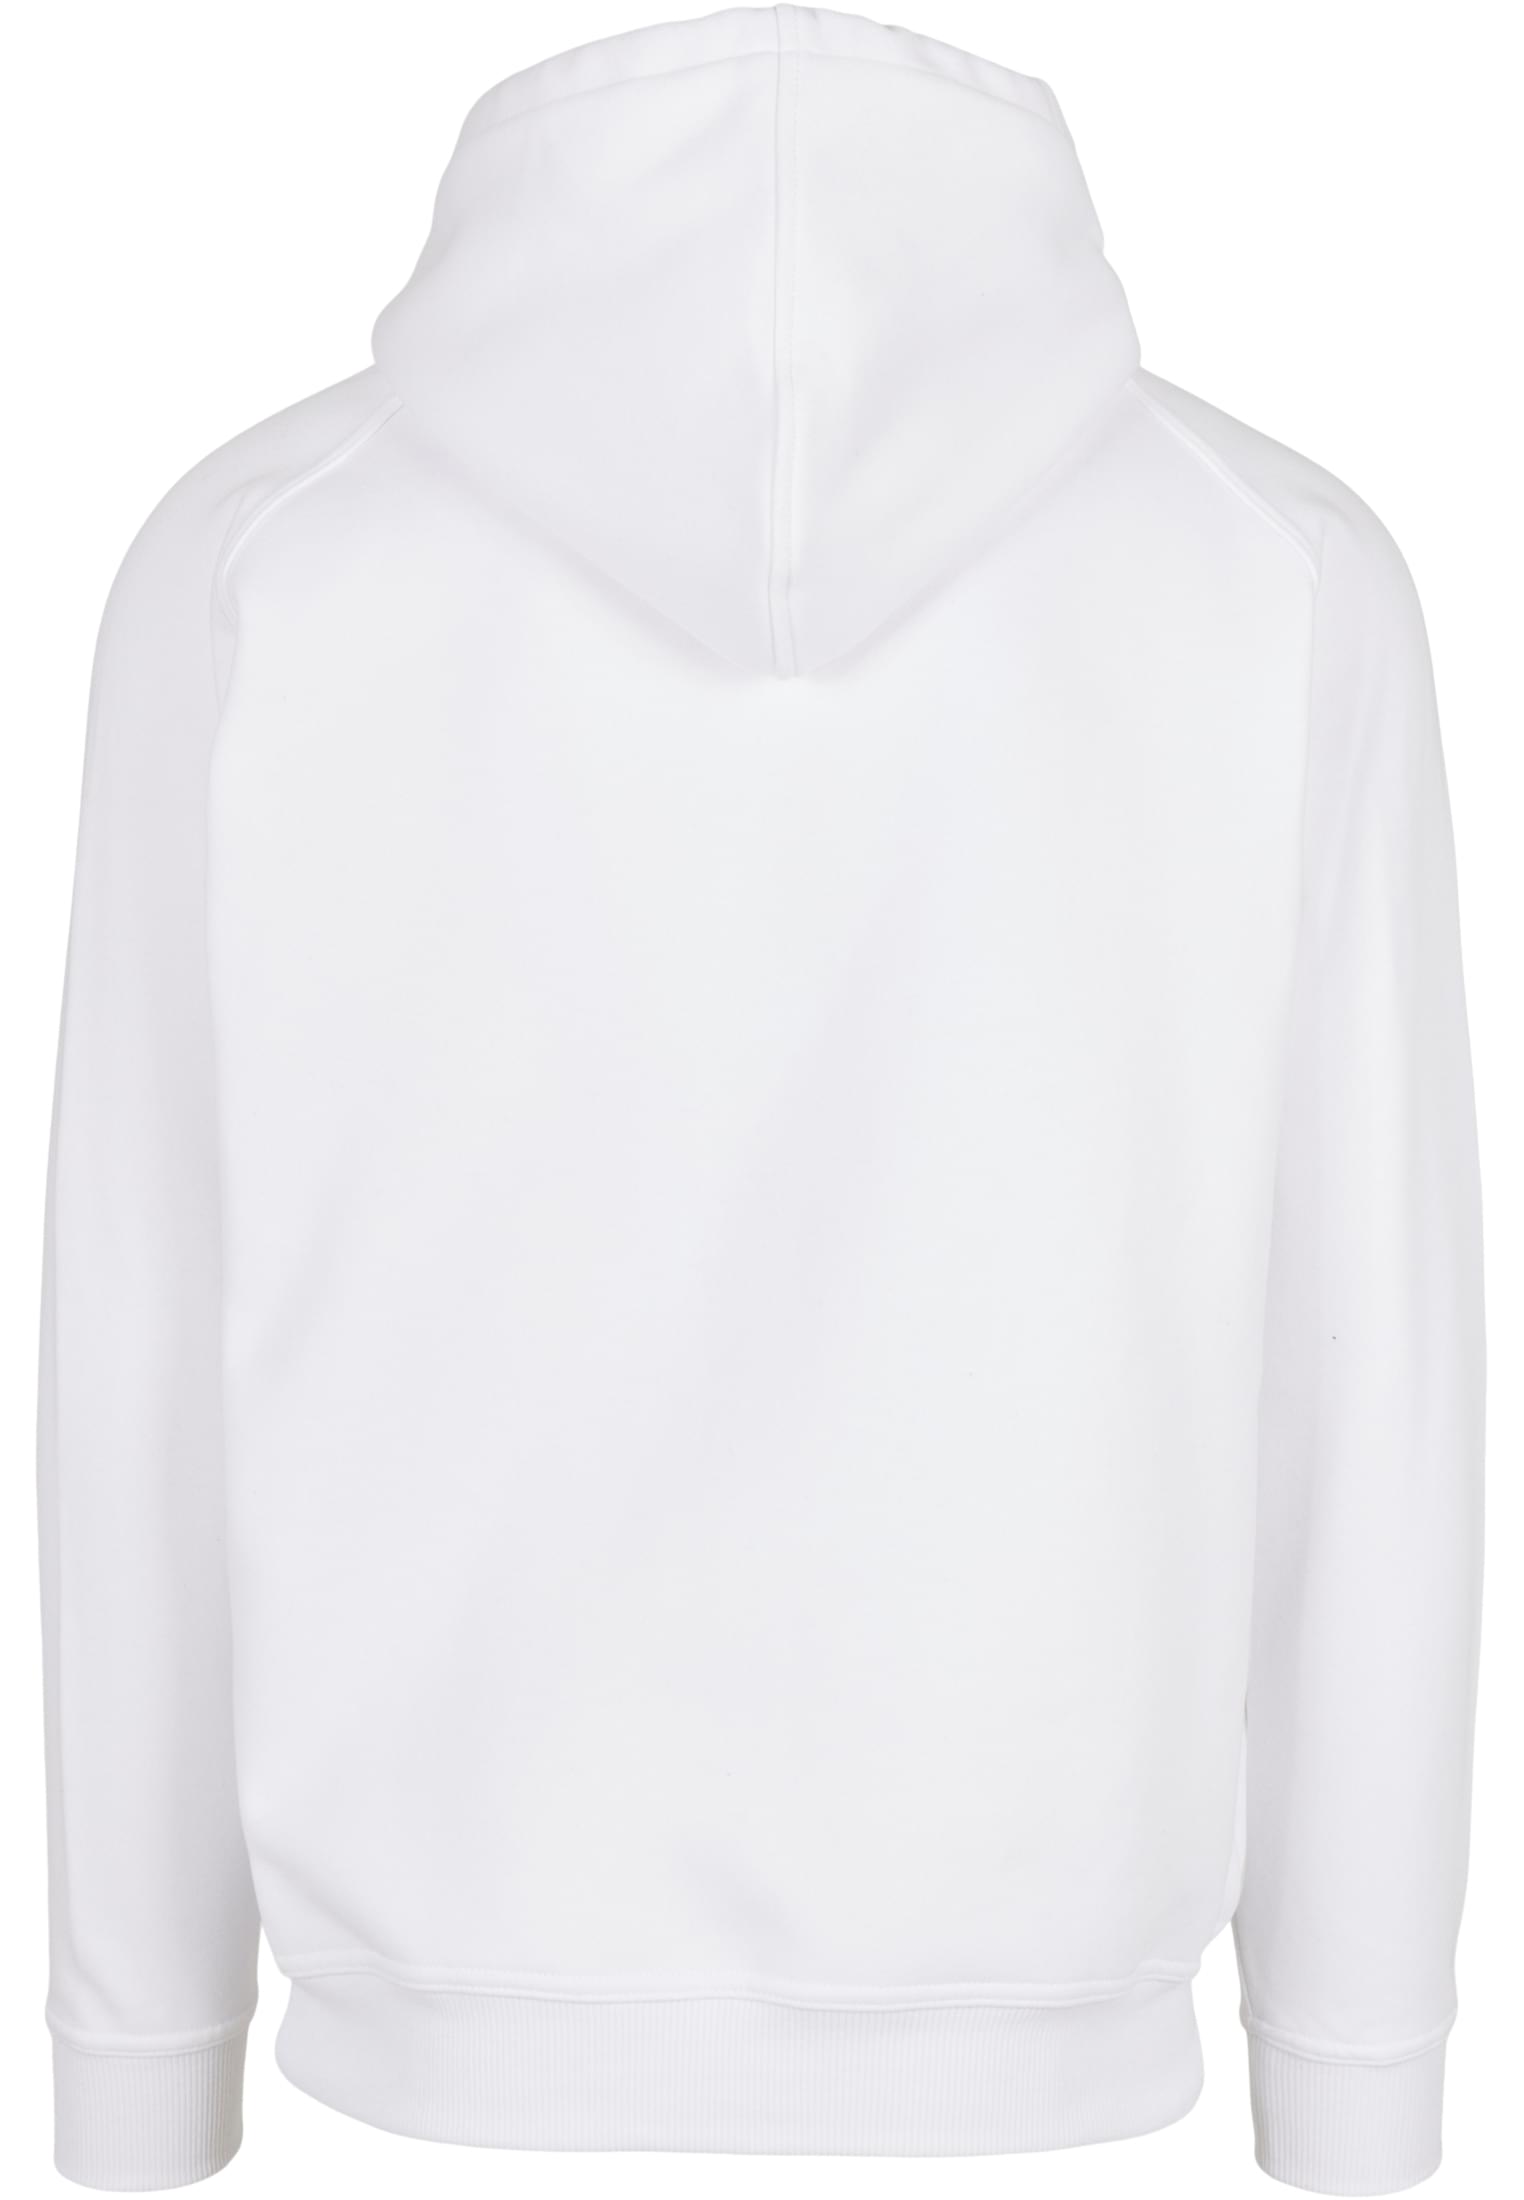 Plus Size Blank Hoody in Farbe white